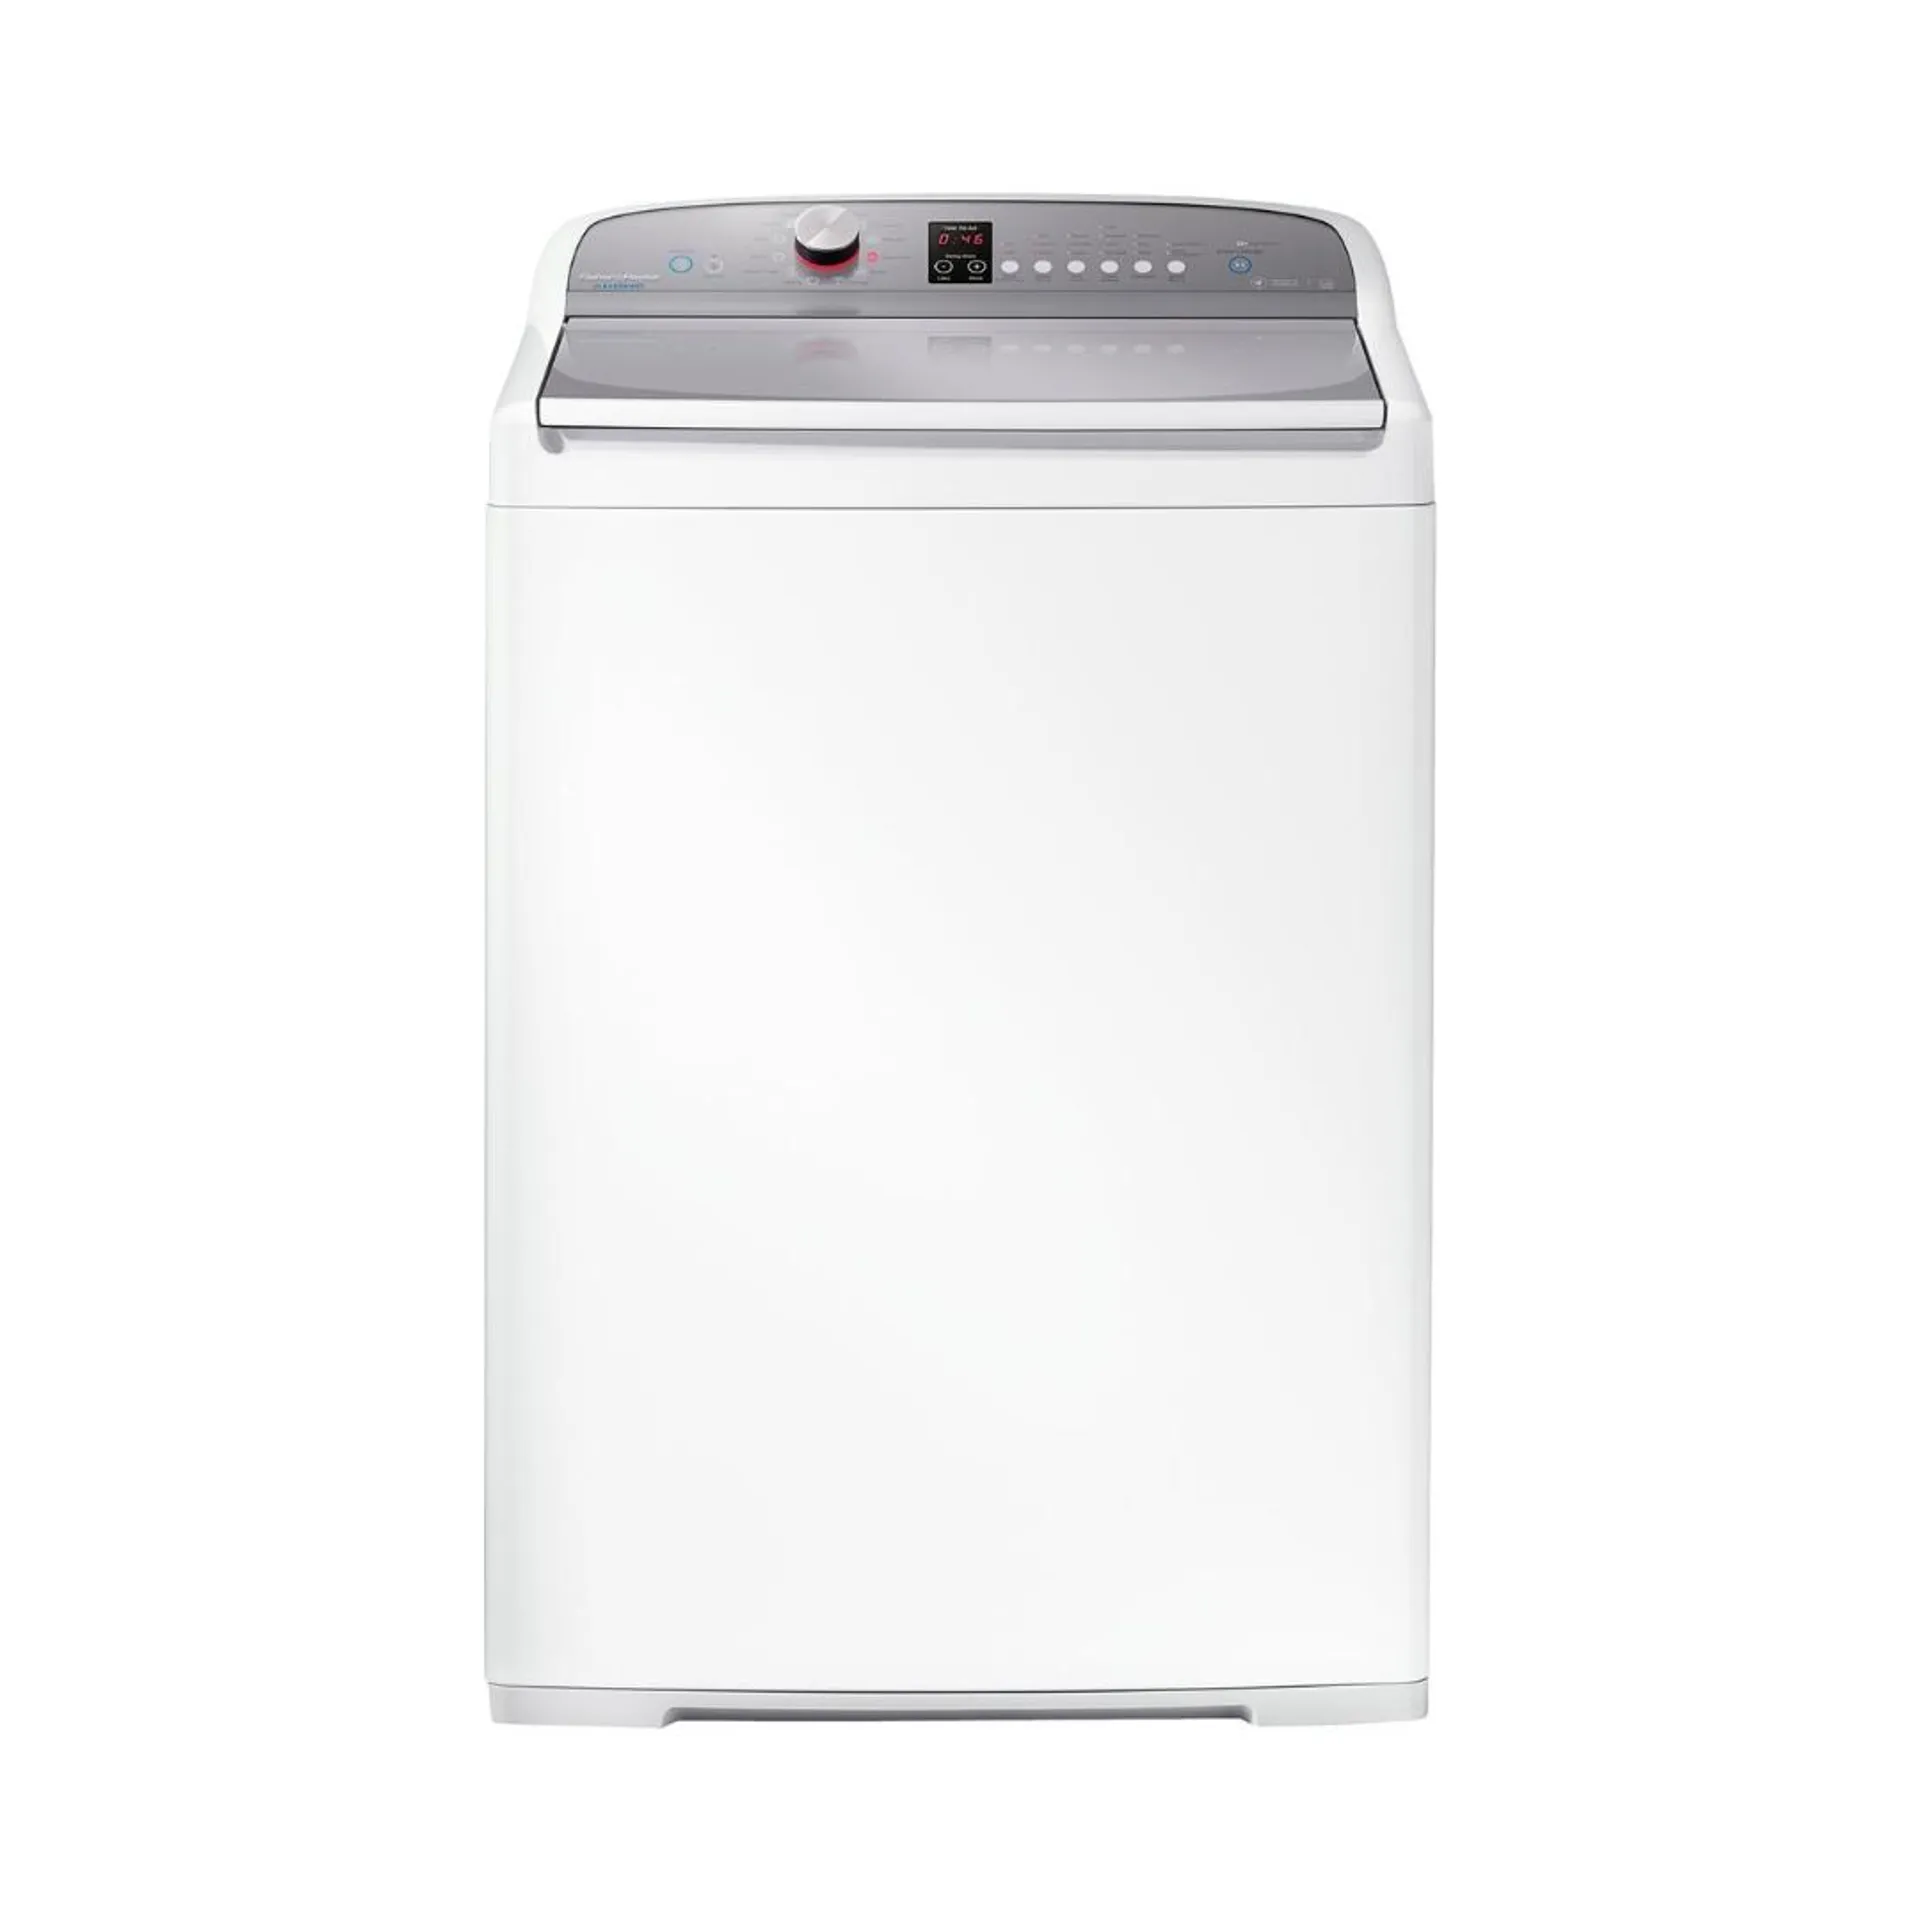 Fisher & Paykel CleanSmart 10kg Top Load Washing Machine